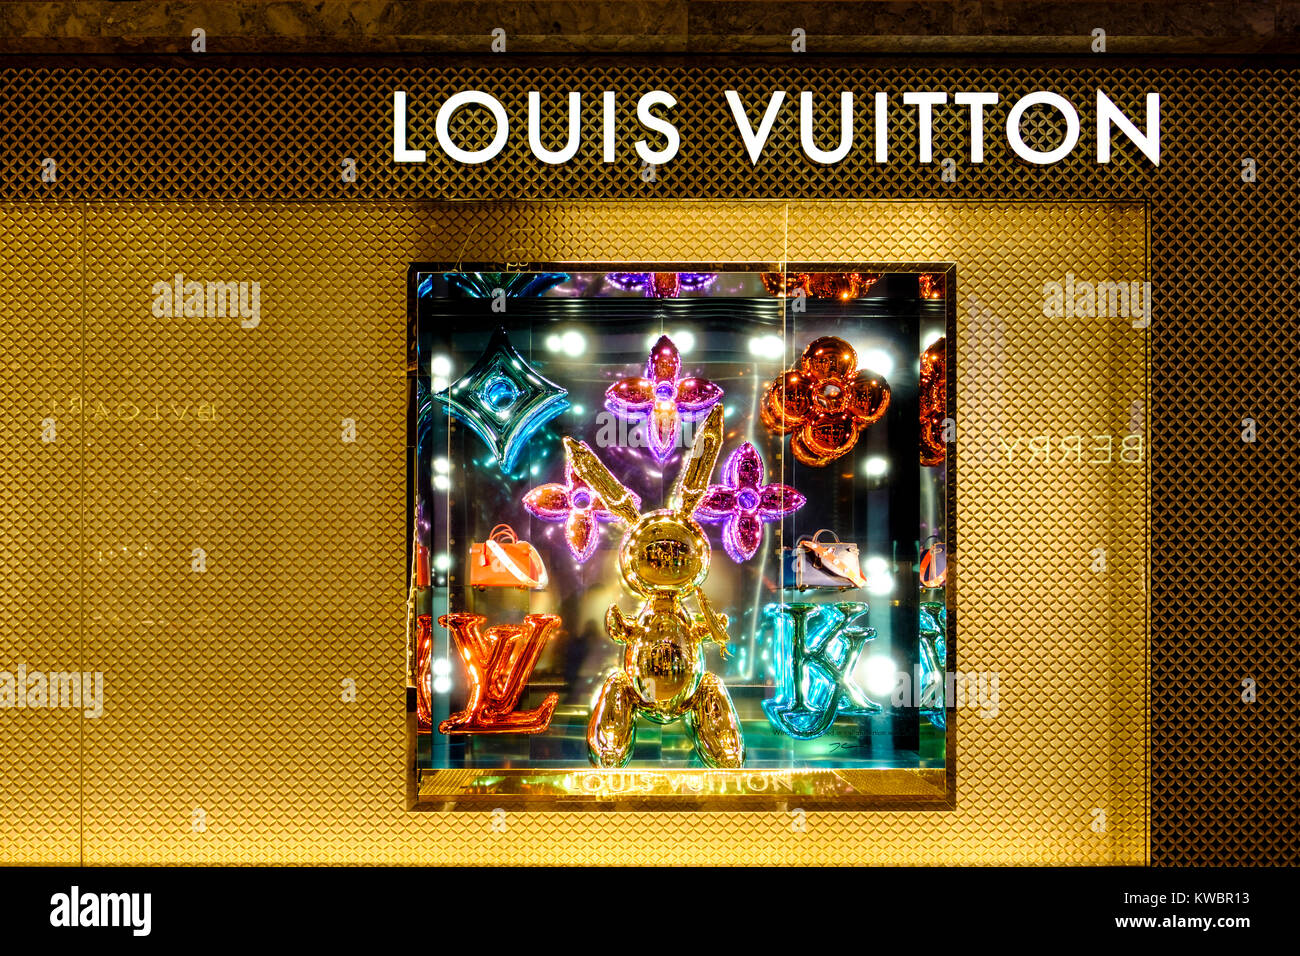 Louis Vuitton shop window decorated with colourful balloons, gold